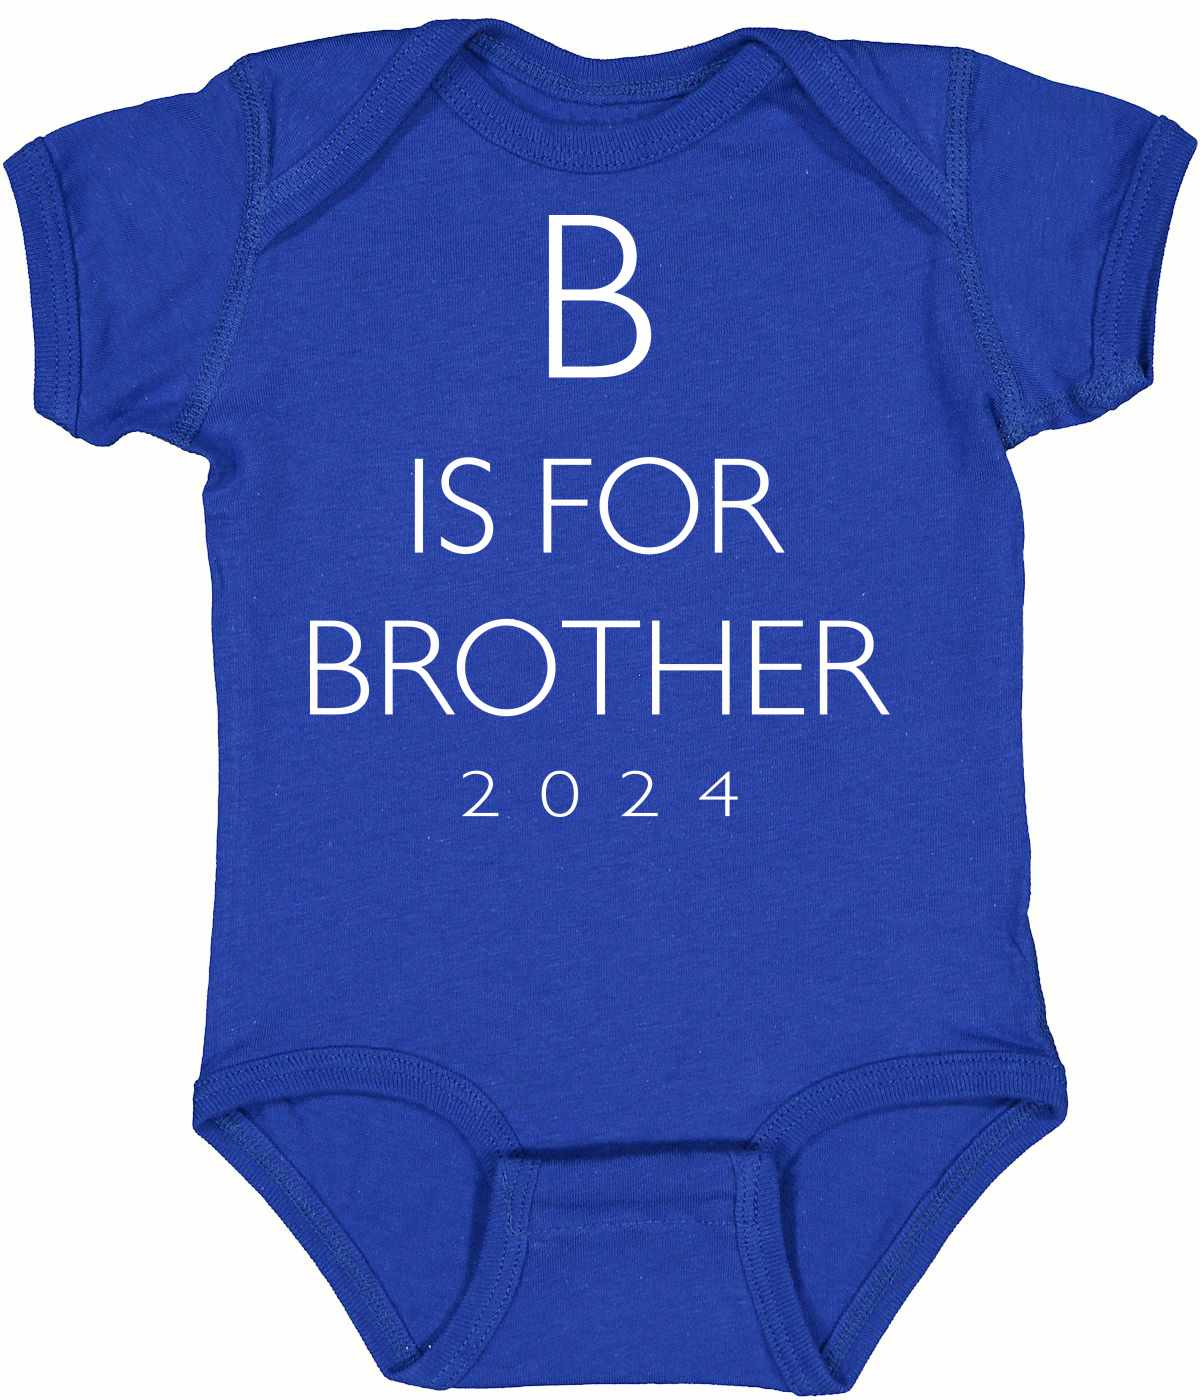 B Is For Brother 2024 on Infant BodySuit